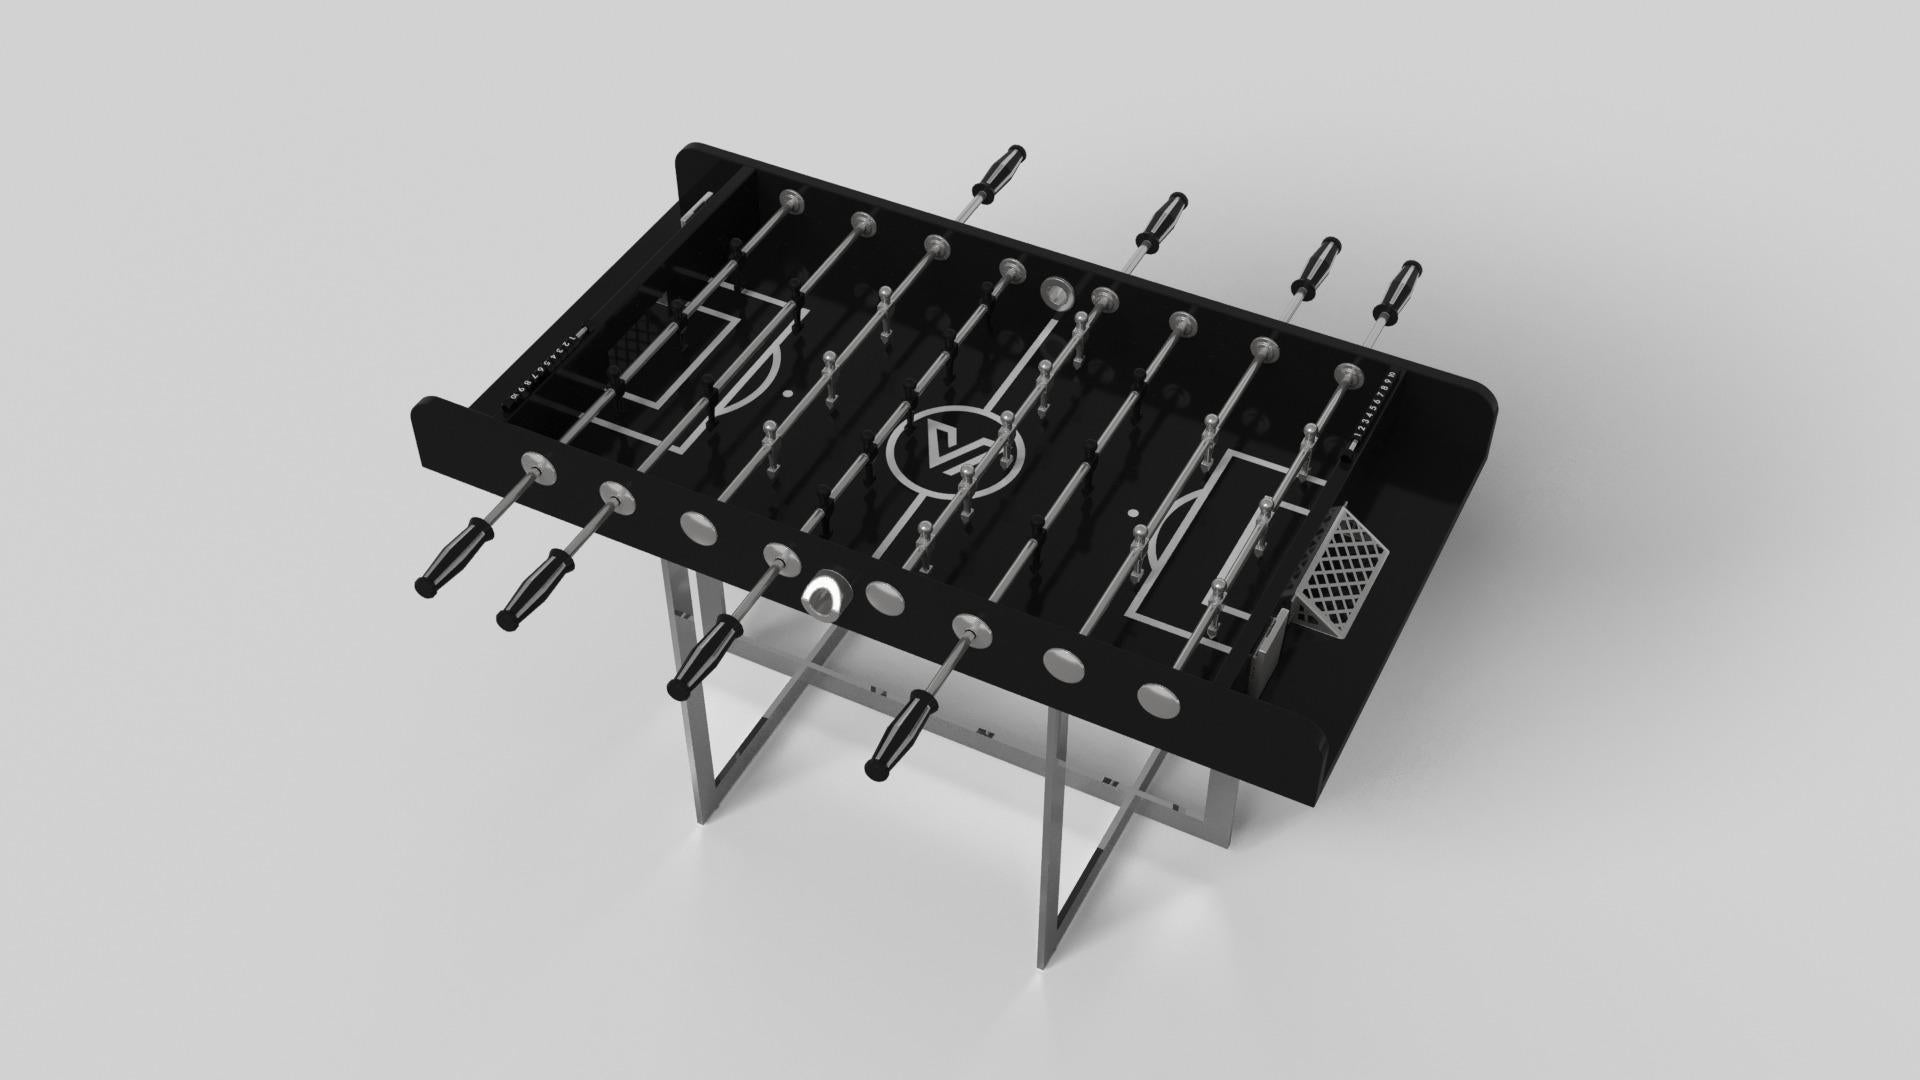 With an open metal foundation, our Beso table is a unique expression of contemporary forms and negative space. This foosball table is handcrafted by our master artisans with a rectangle-in-rectangle base that echoes the angles and edges of a